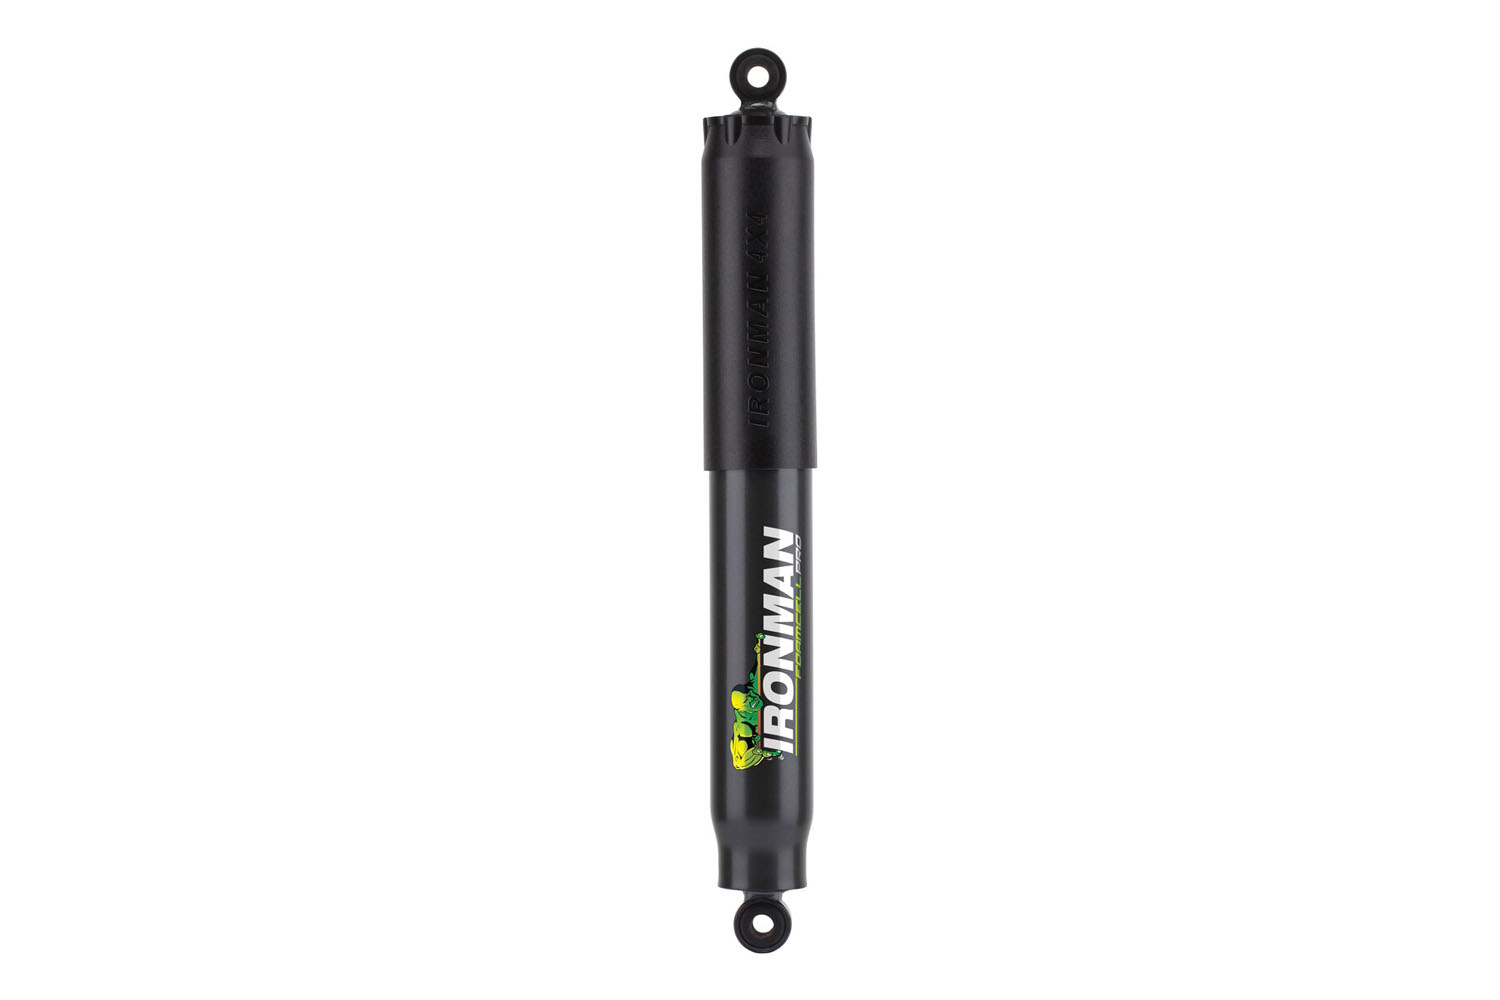 Foam Cell Pro Rear Shocks Suited For Toyota Tacoma 1995-04 / 71 / 75 Series Land Cruiser Questions & Answers